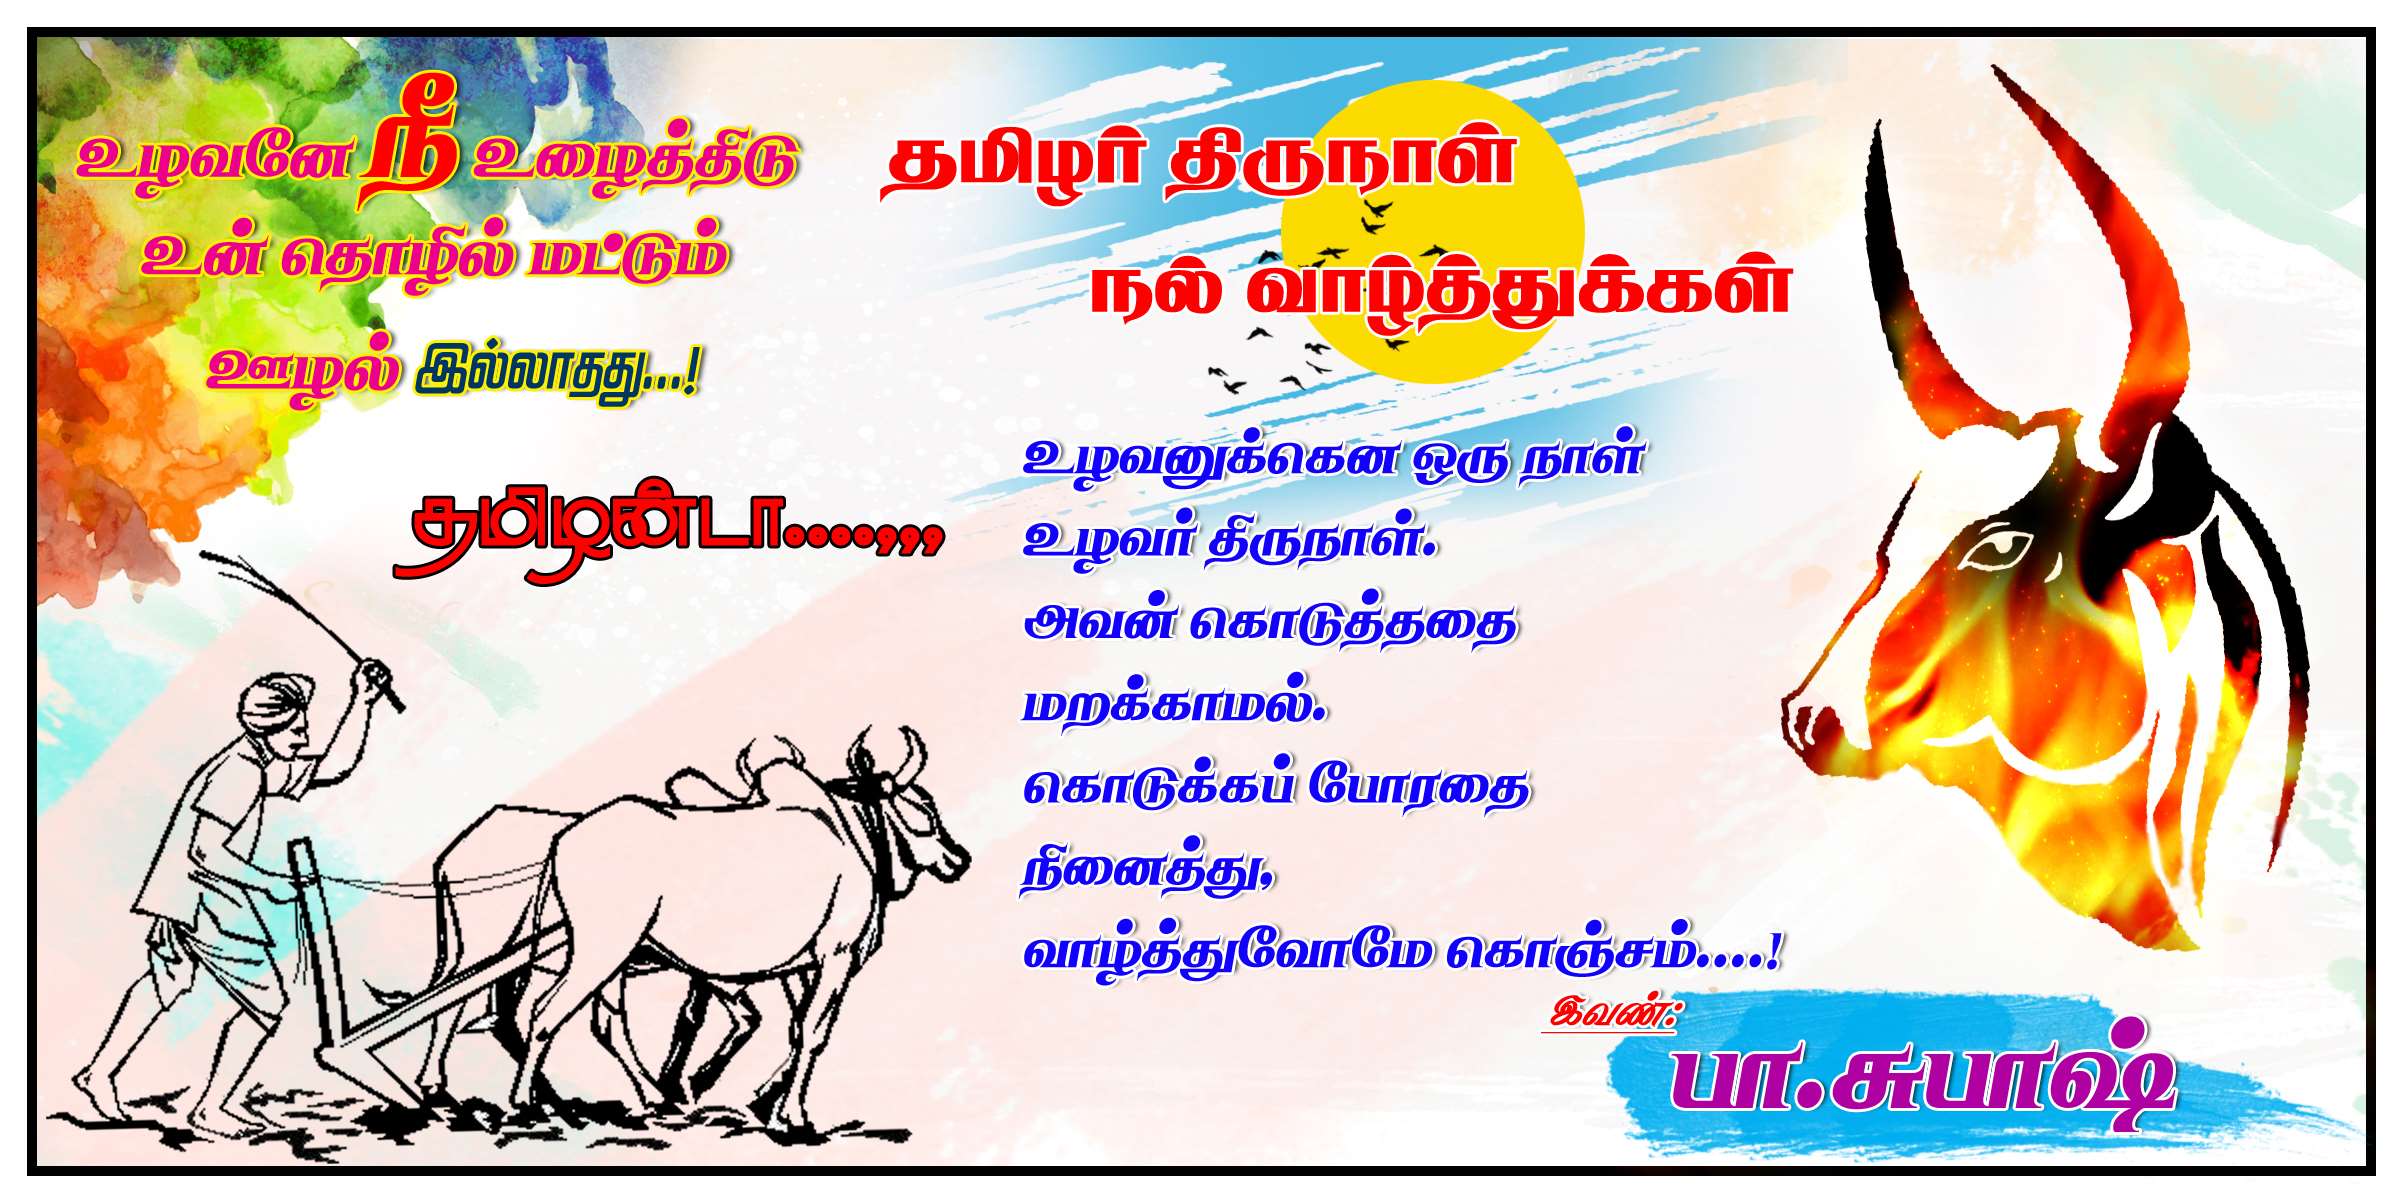 berrie arts, pongal, tamil wallpaper and background. Free